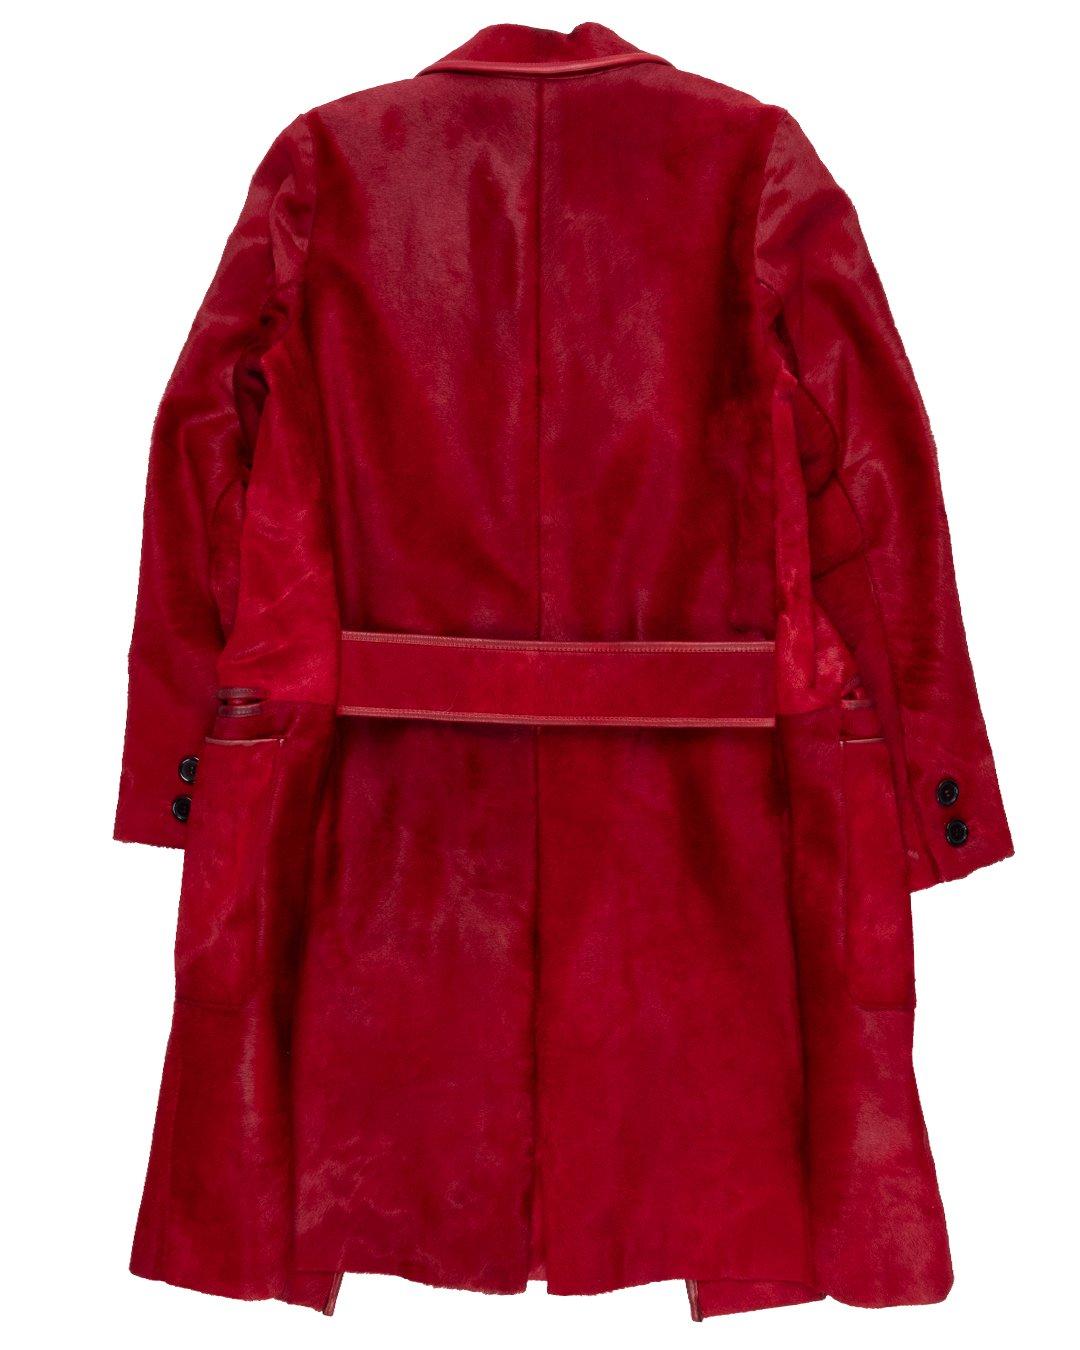 This coat speaks to the sophistication of Muccia Prada’s house, whose straight line cuts and streamlined details render this deep red, pony hair coat not gauche but rather a demure and chic statement.

It features a calf leather trim, large black